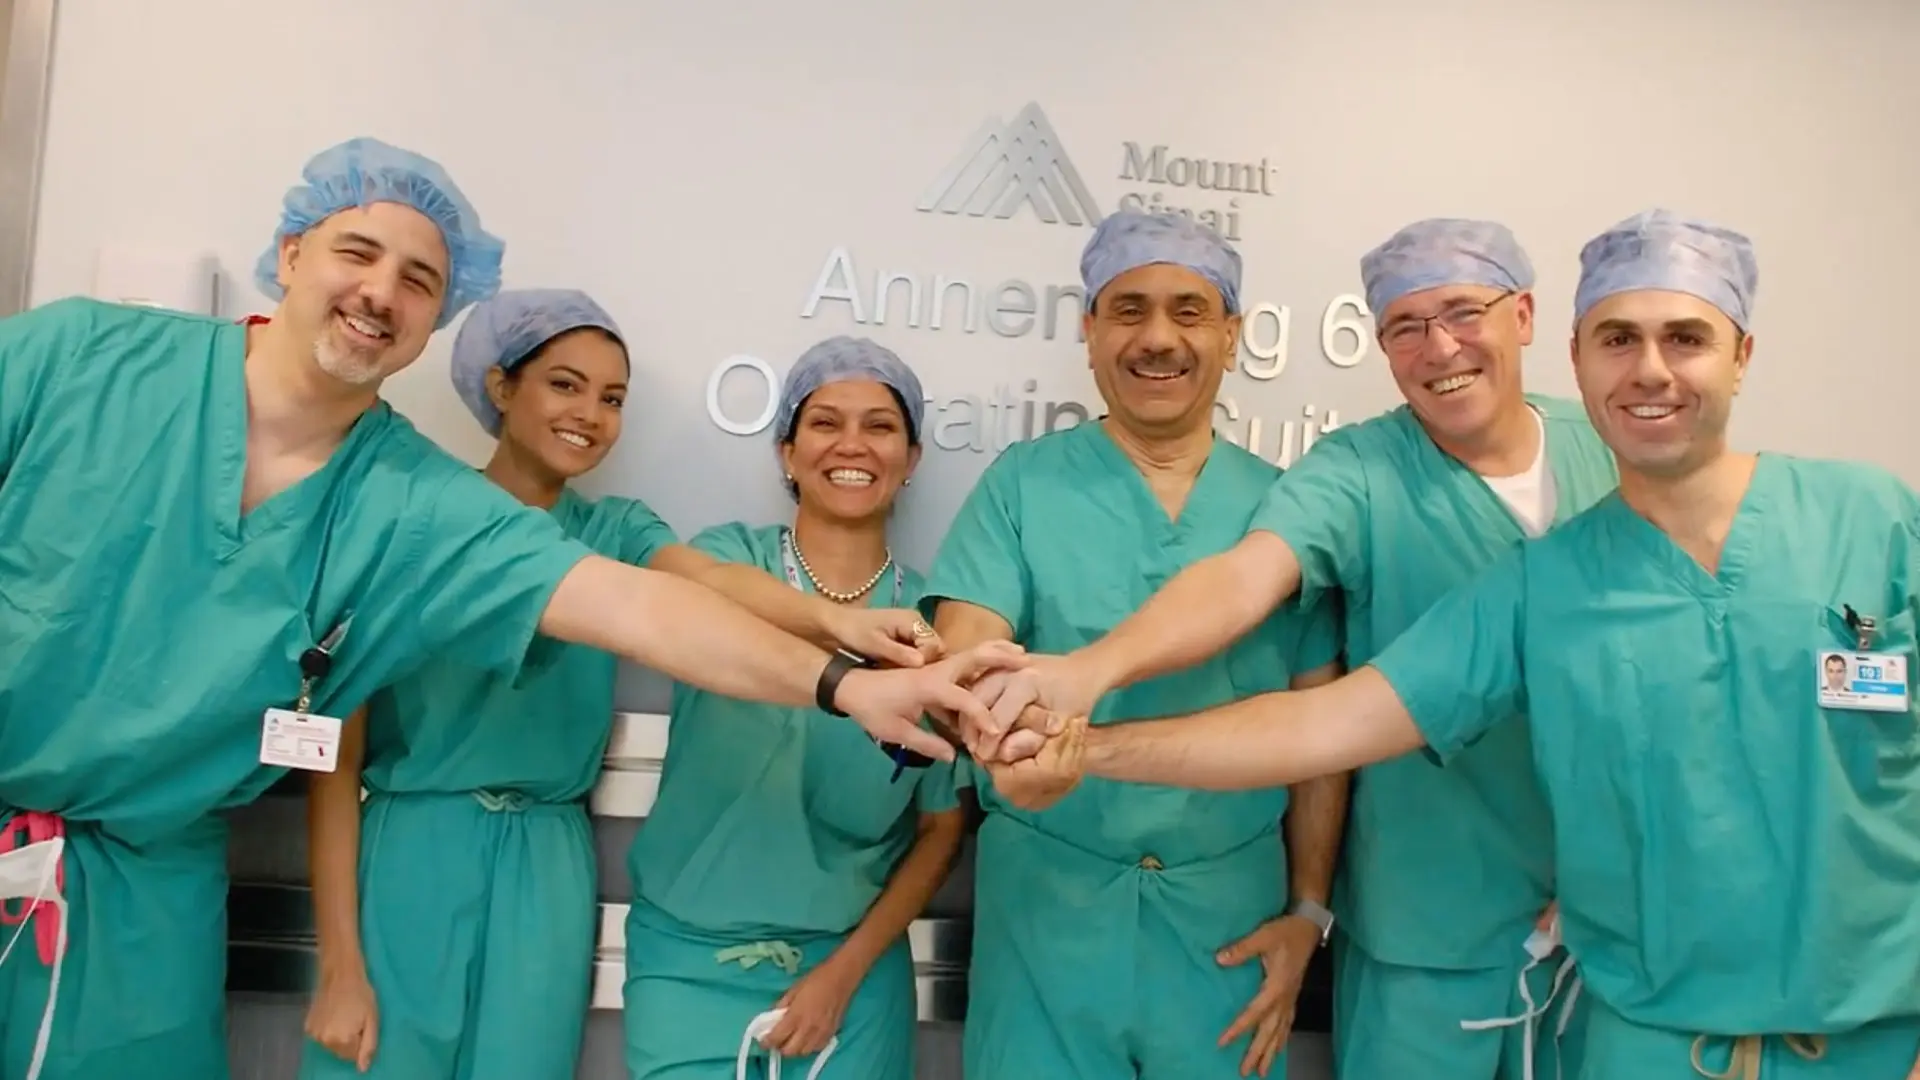 A team at the Department of Urology recently performed the 500th robotic cystectomy in Mount Sinai’s Bladder Cancer Program, a significant milestone that underscores innovations in patient care, research, and clinical excellence that make Mount Sinai’s program a leader in the field.